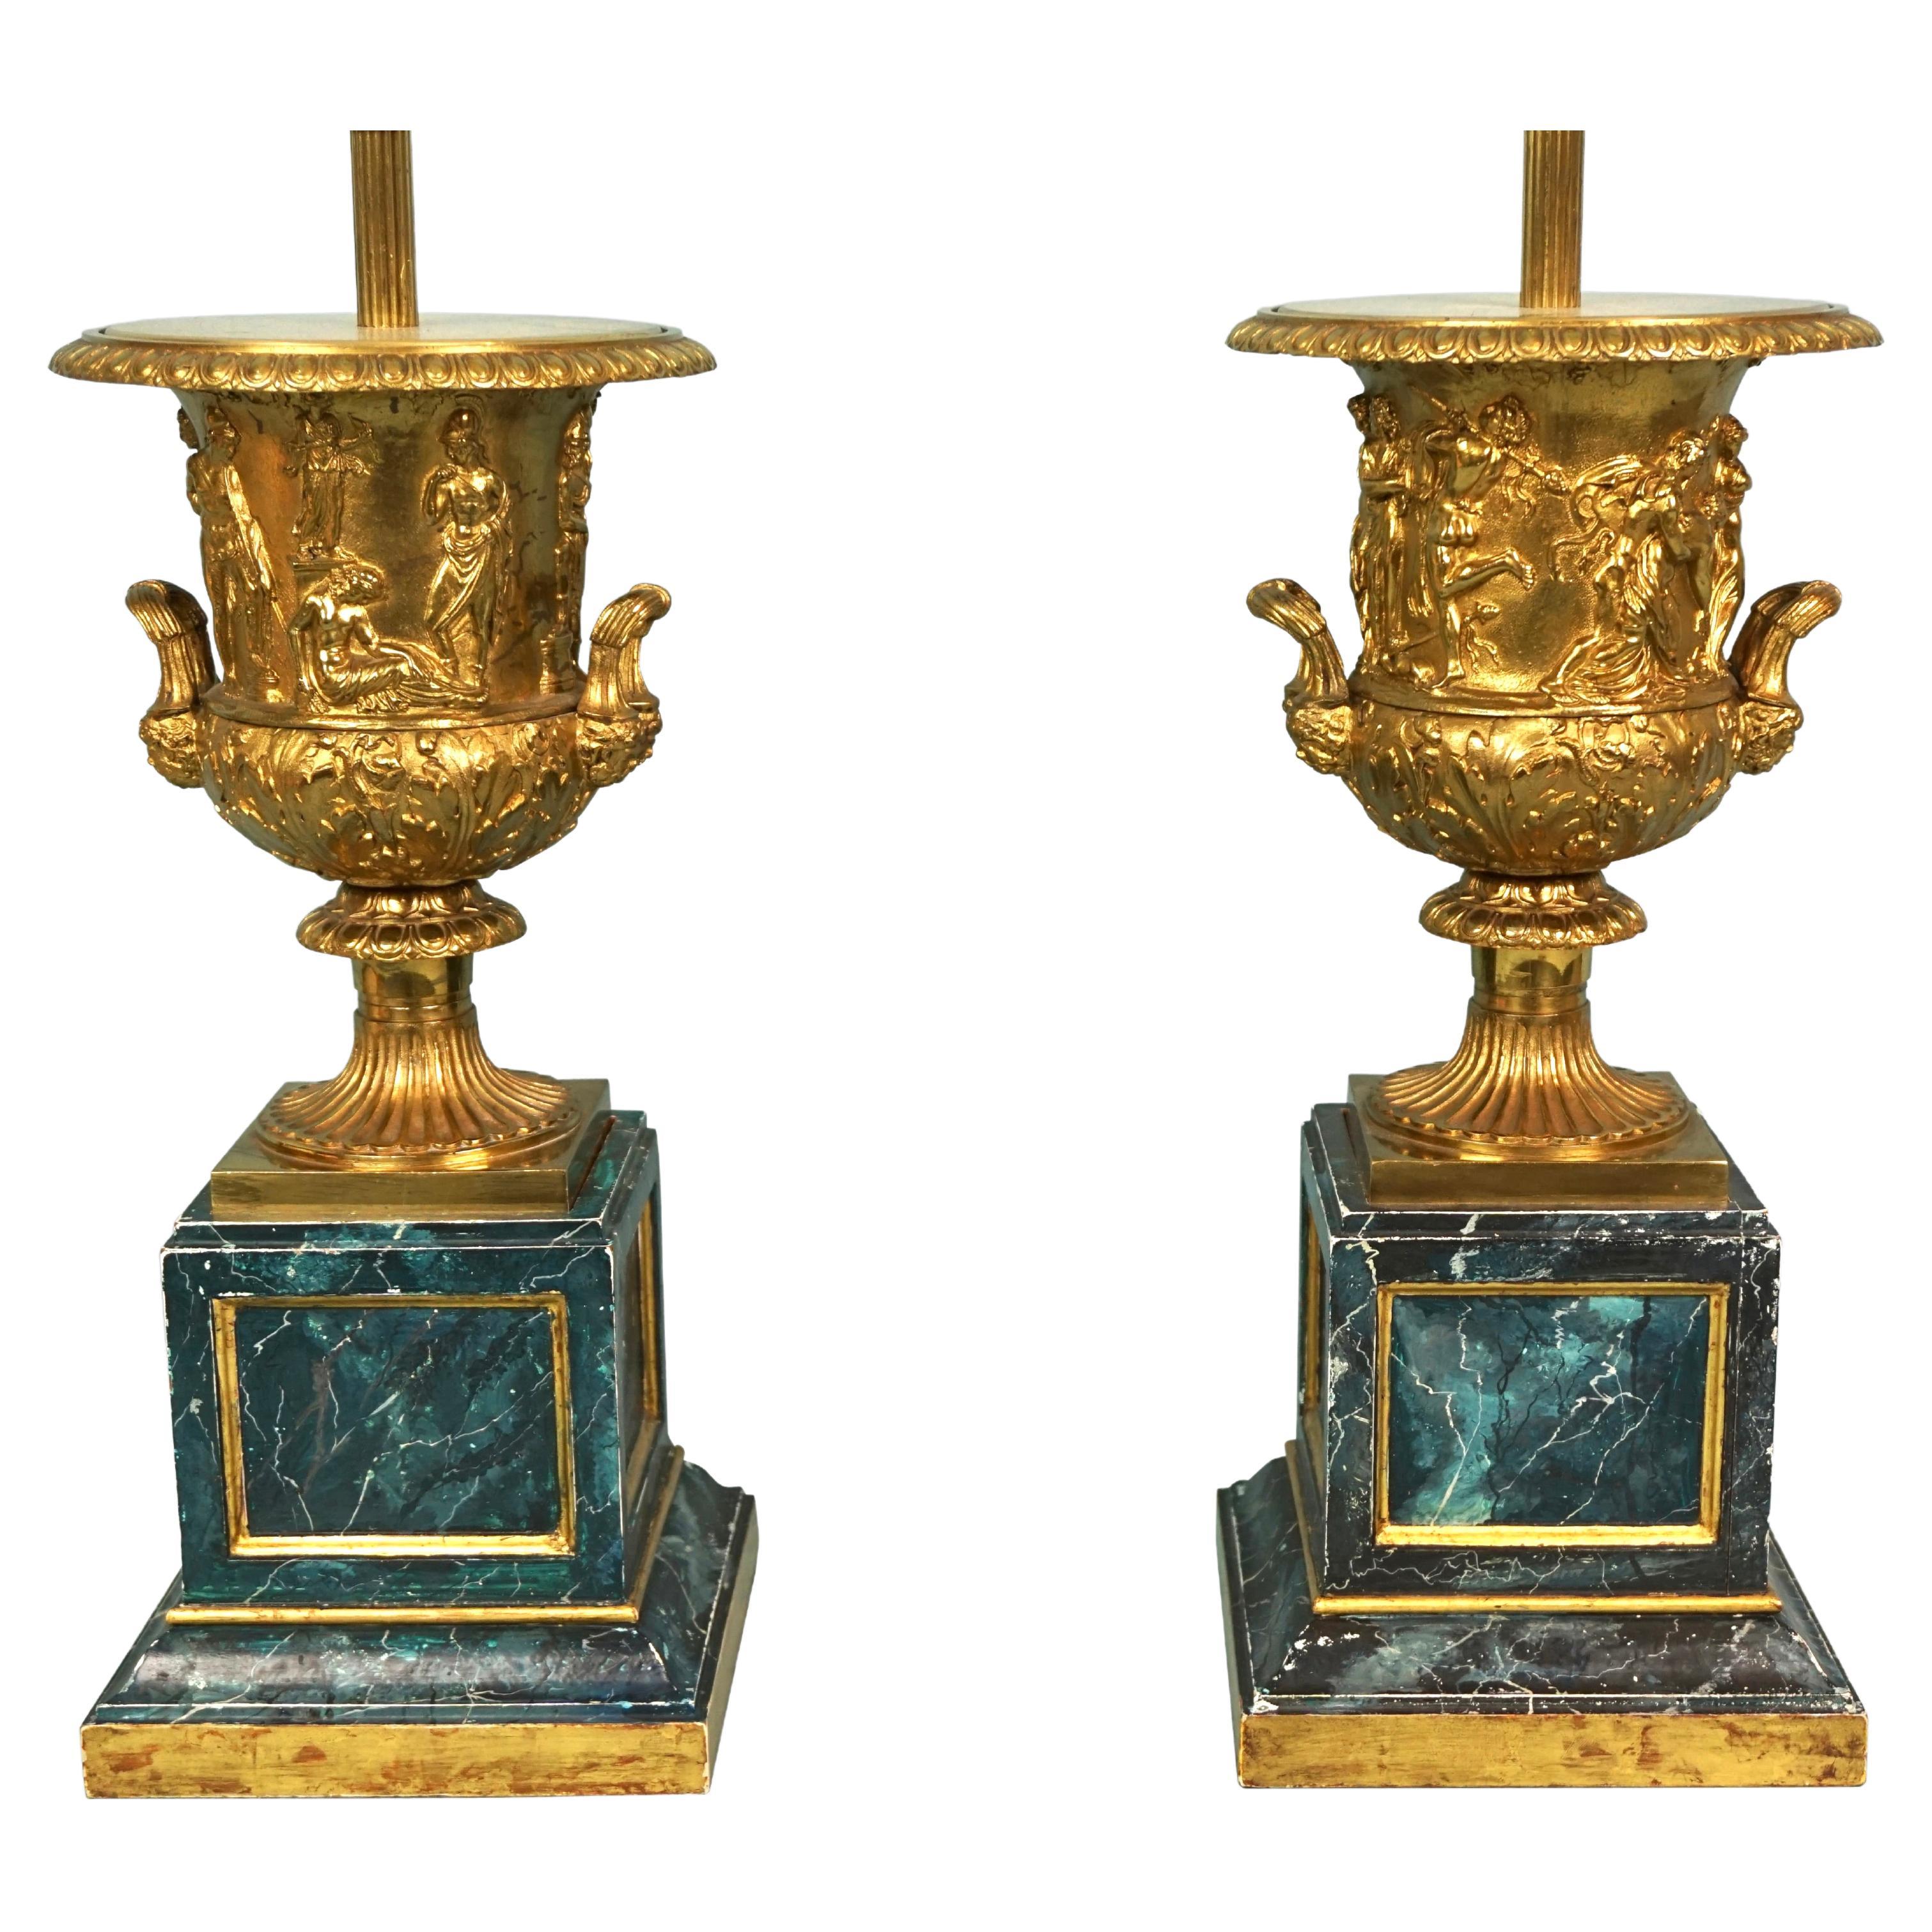 Pair of Neoclassical Style Brass Urns Now as Lamps on Painted Faux Marble Bases